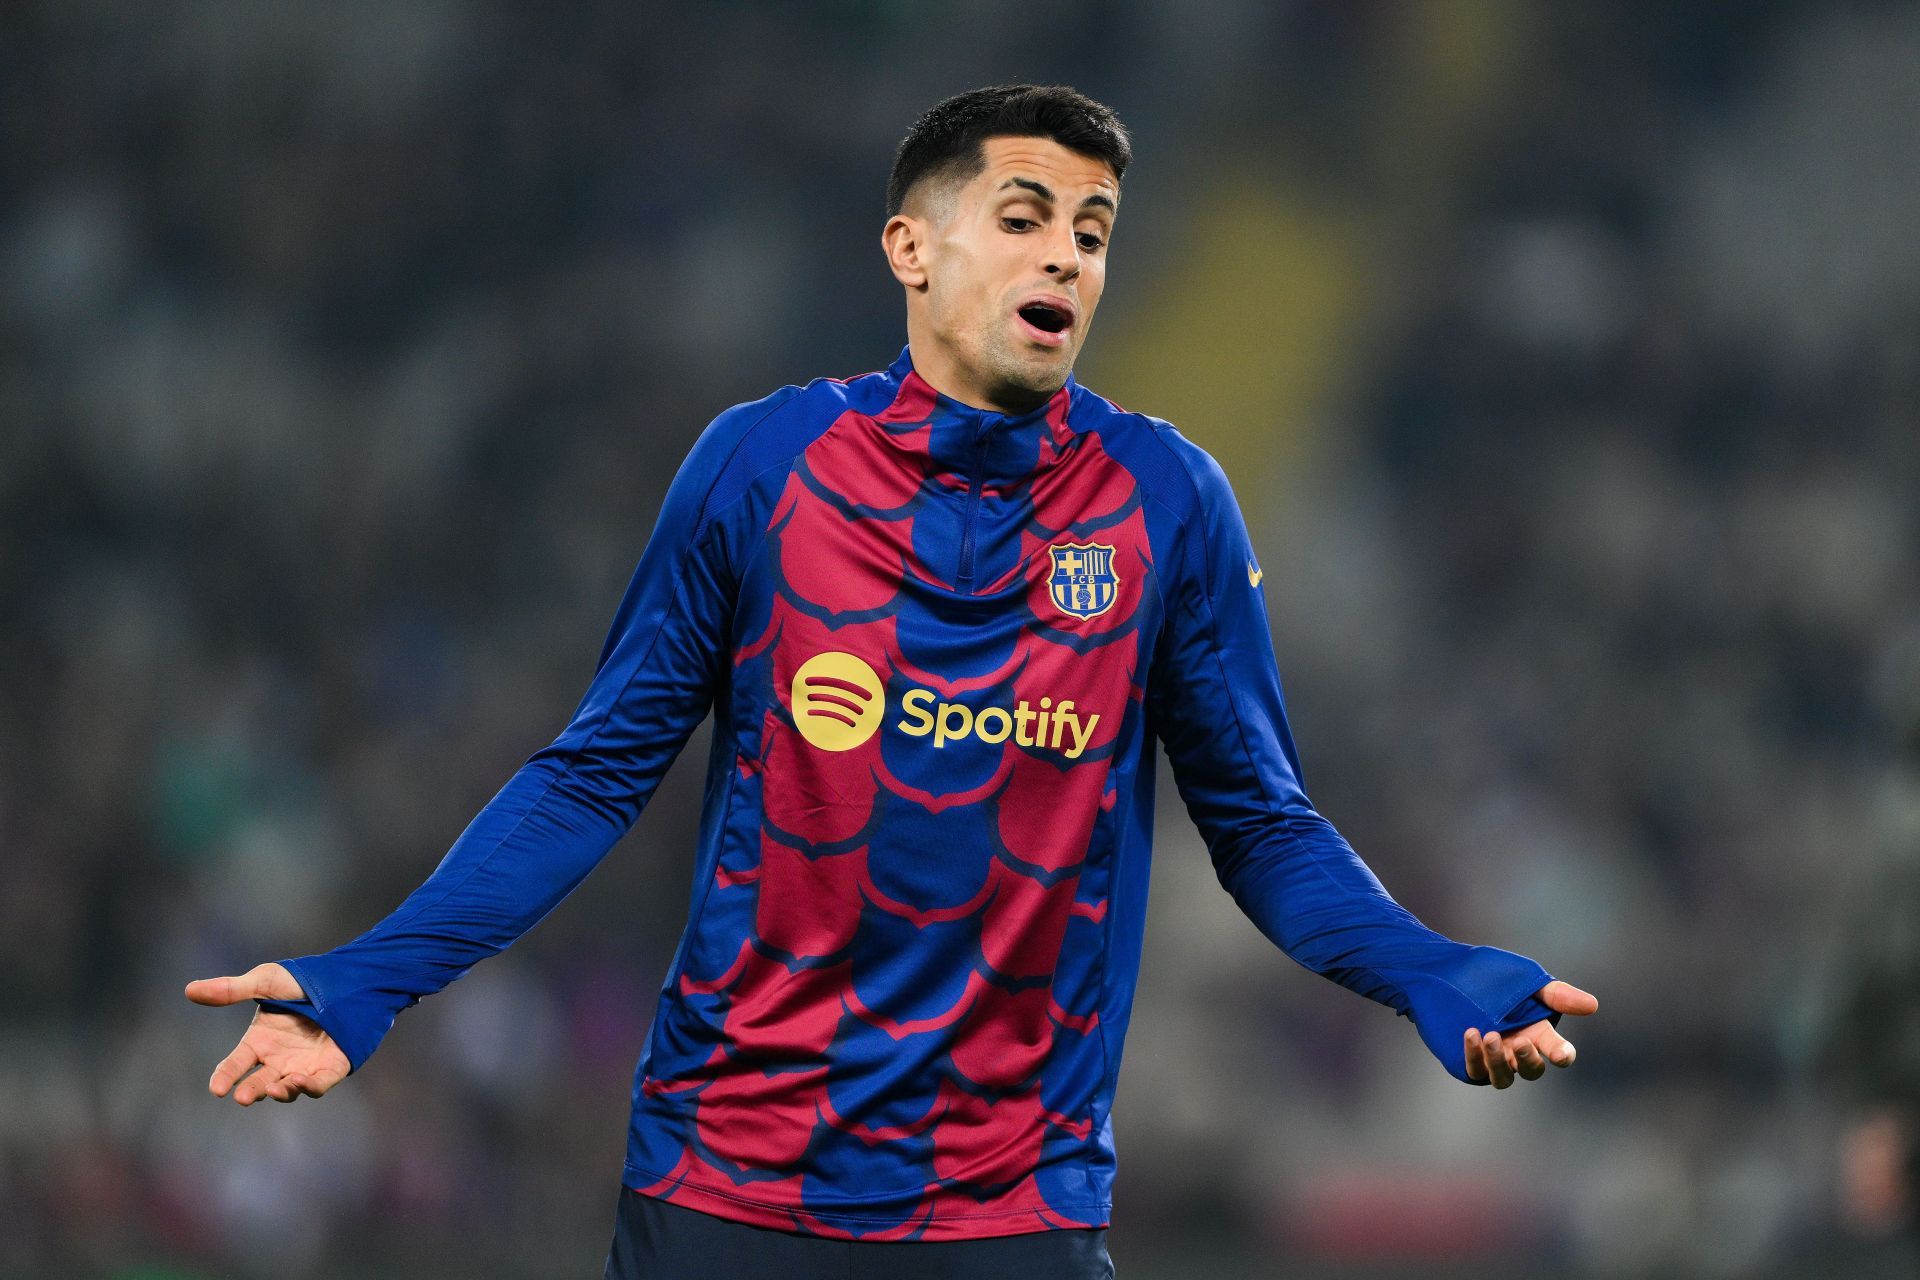 Joao Cancelo has hit the ground running at the Camp Nou this season.